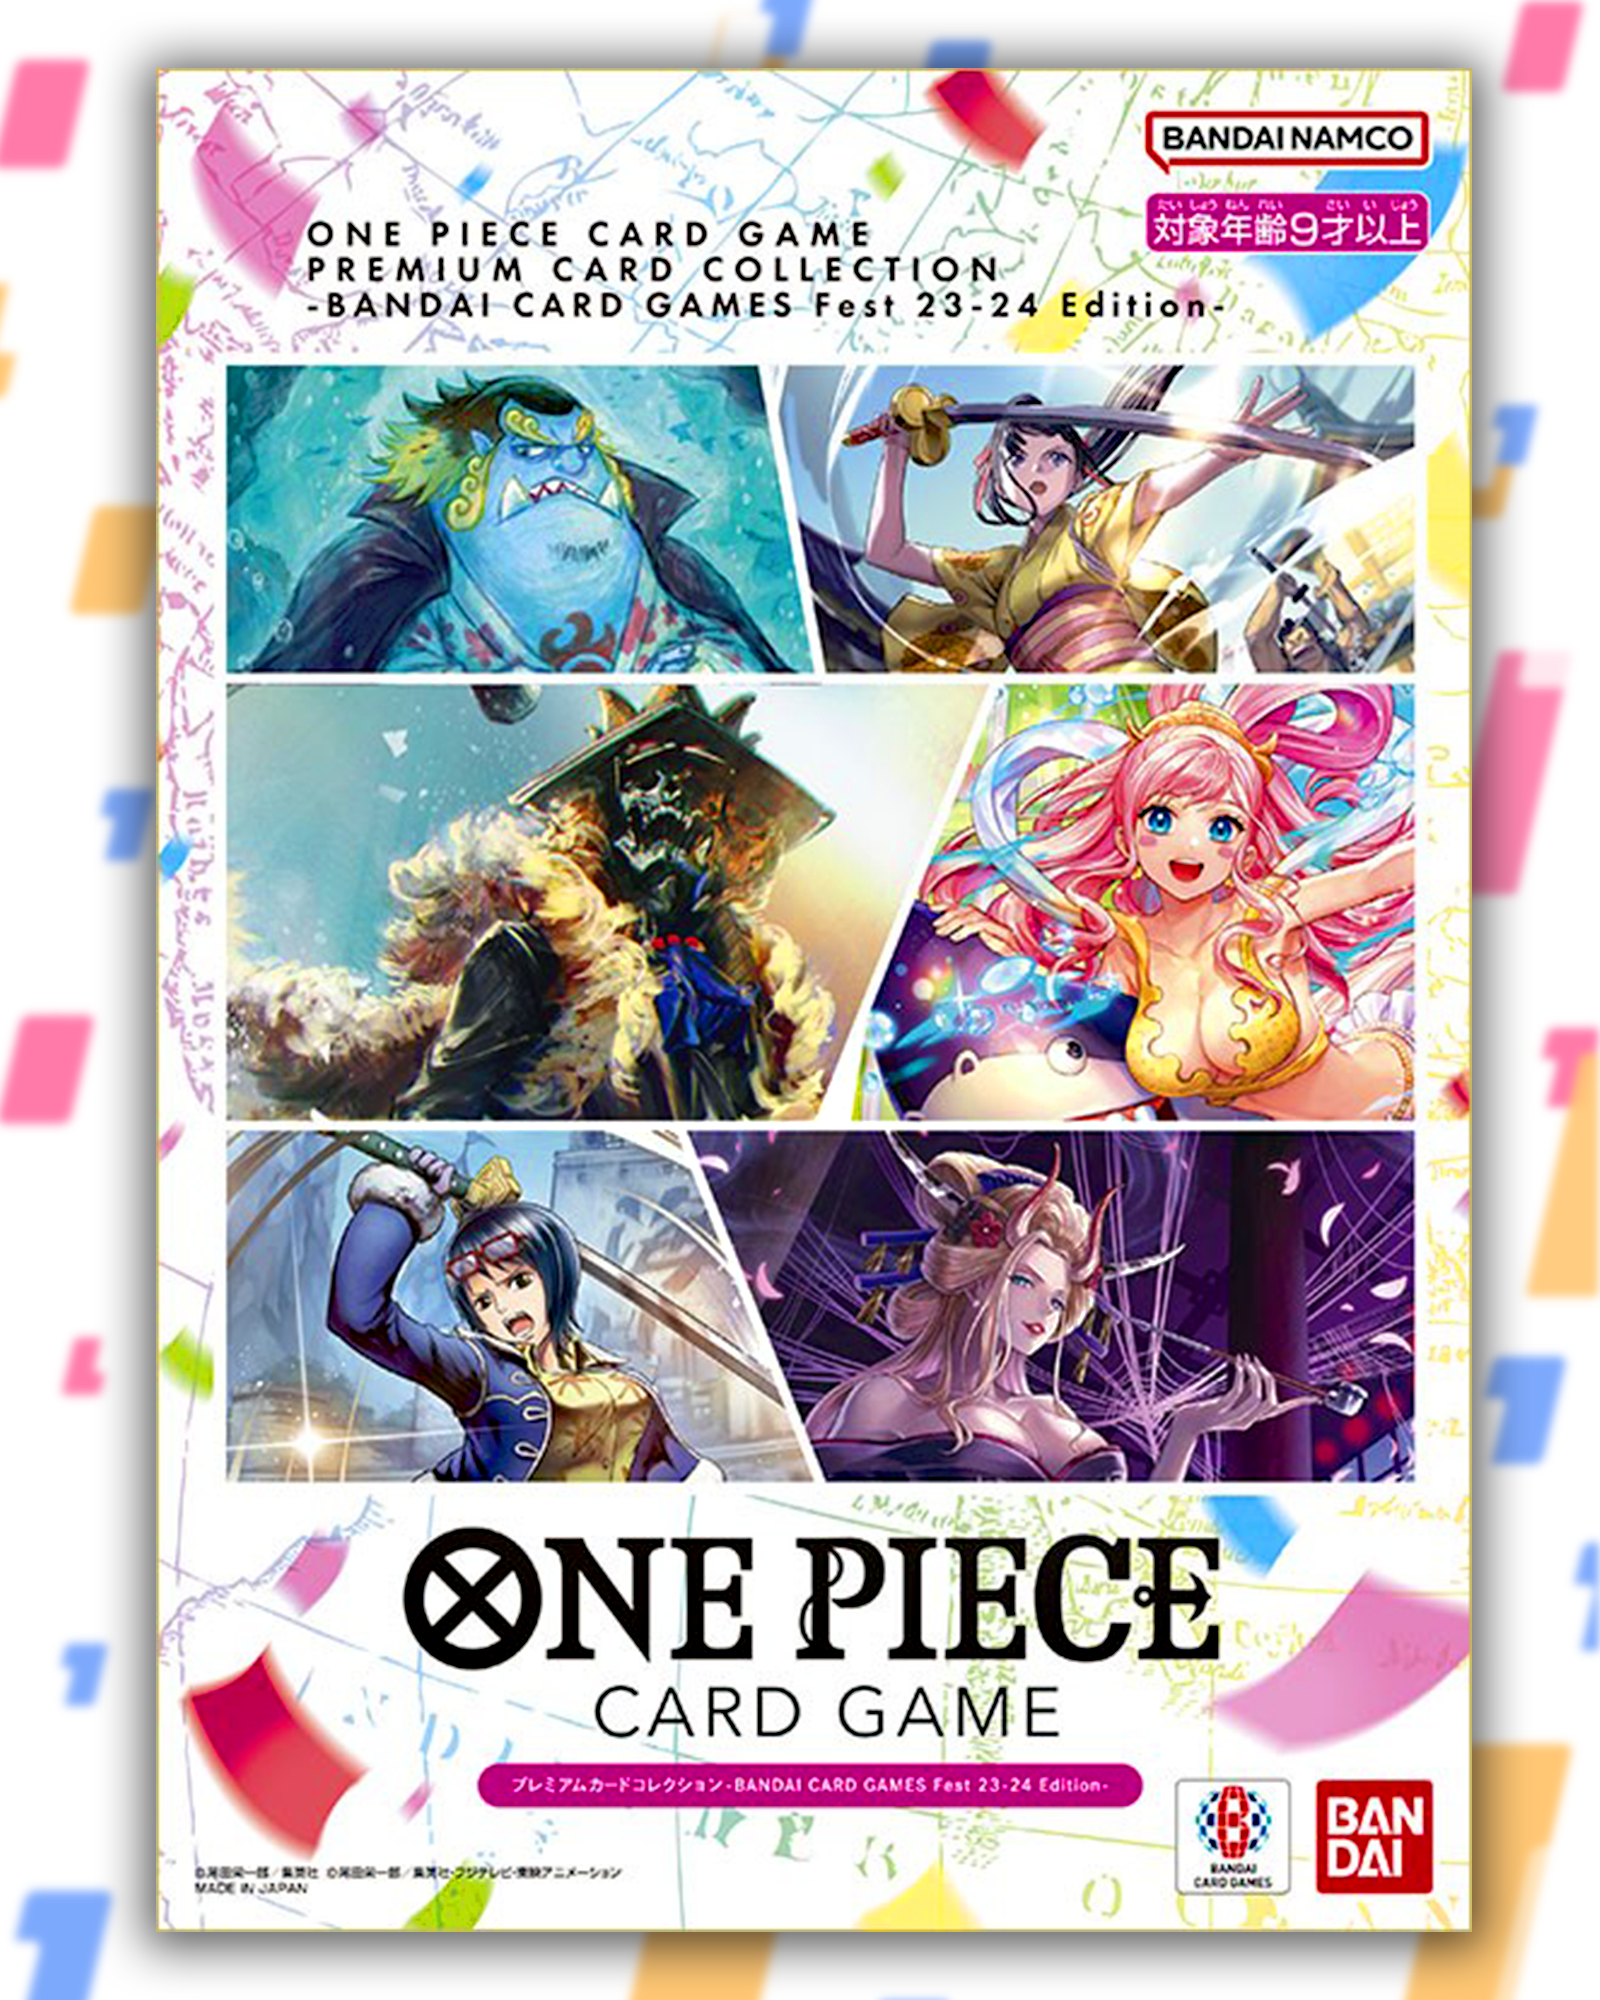 ONE PIECE CARD GAME PREMIUM CARD COLLECTION - BANDAI CARD GAMES FEST 23-24 EDITION